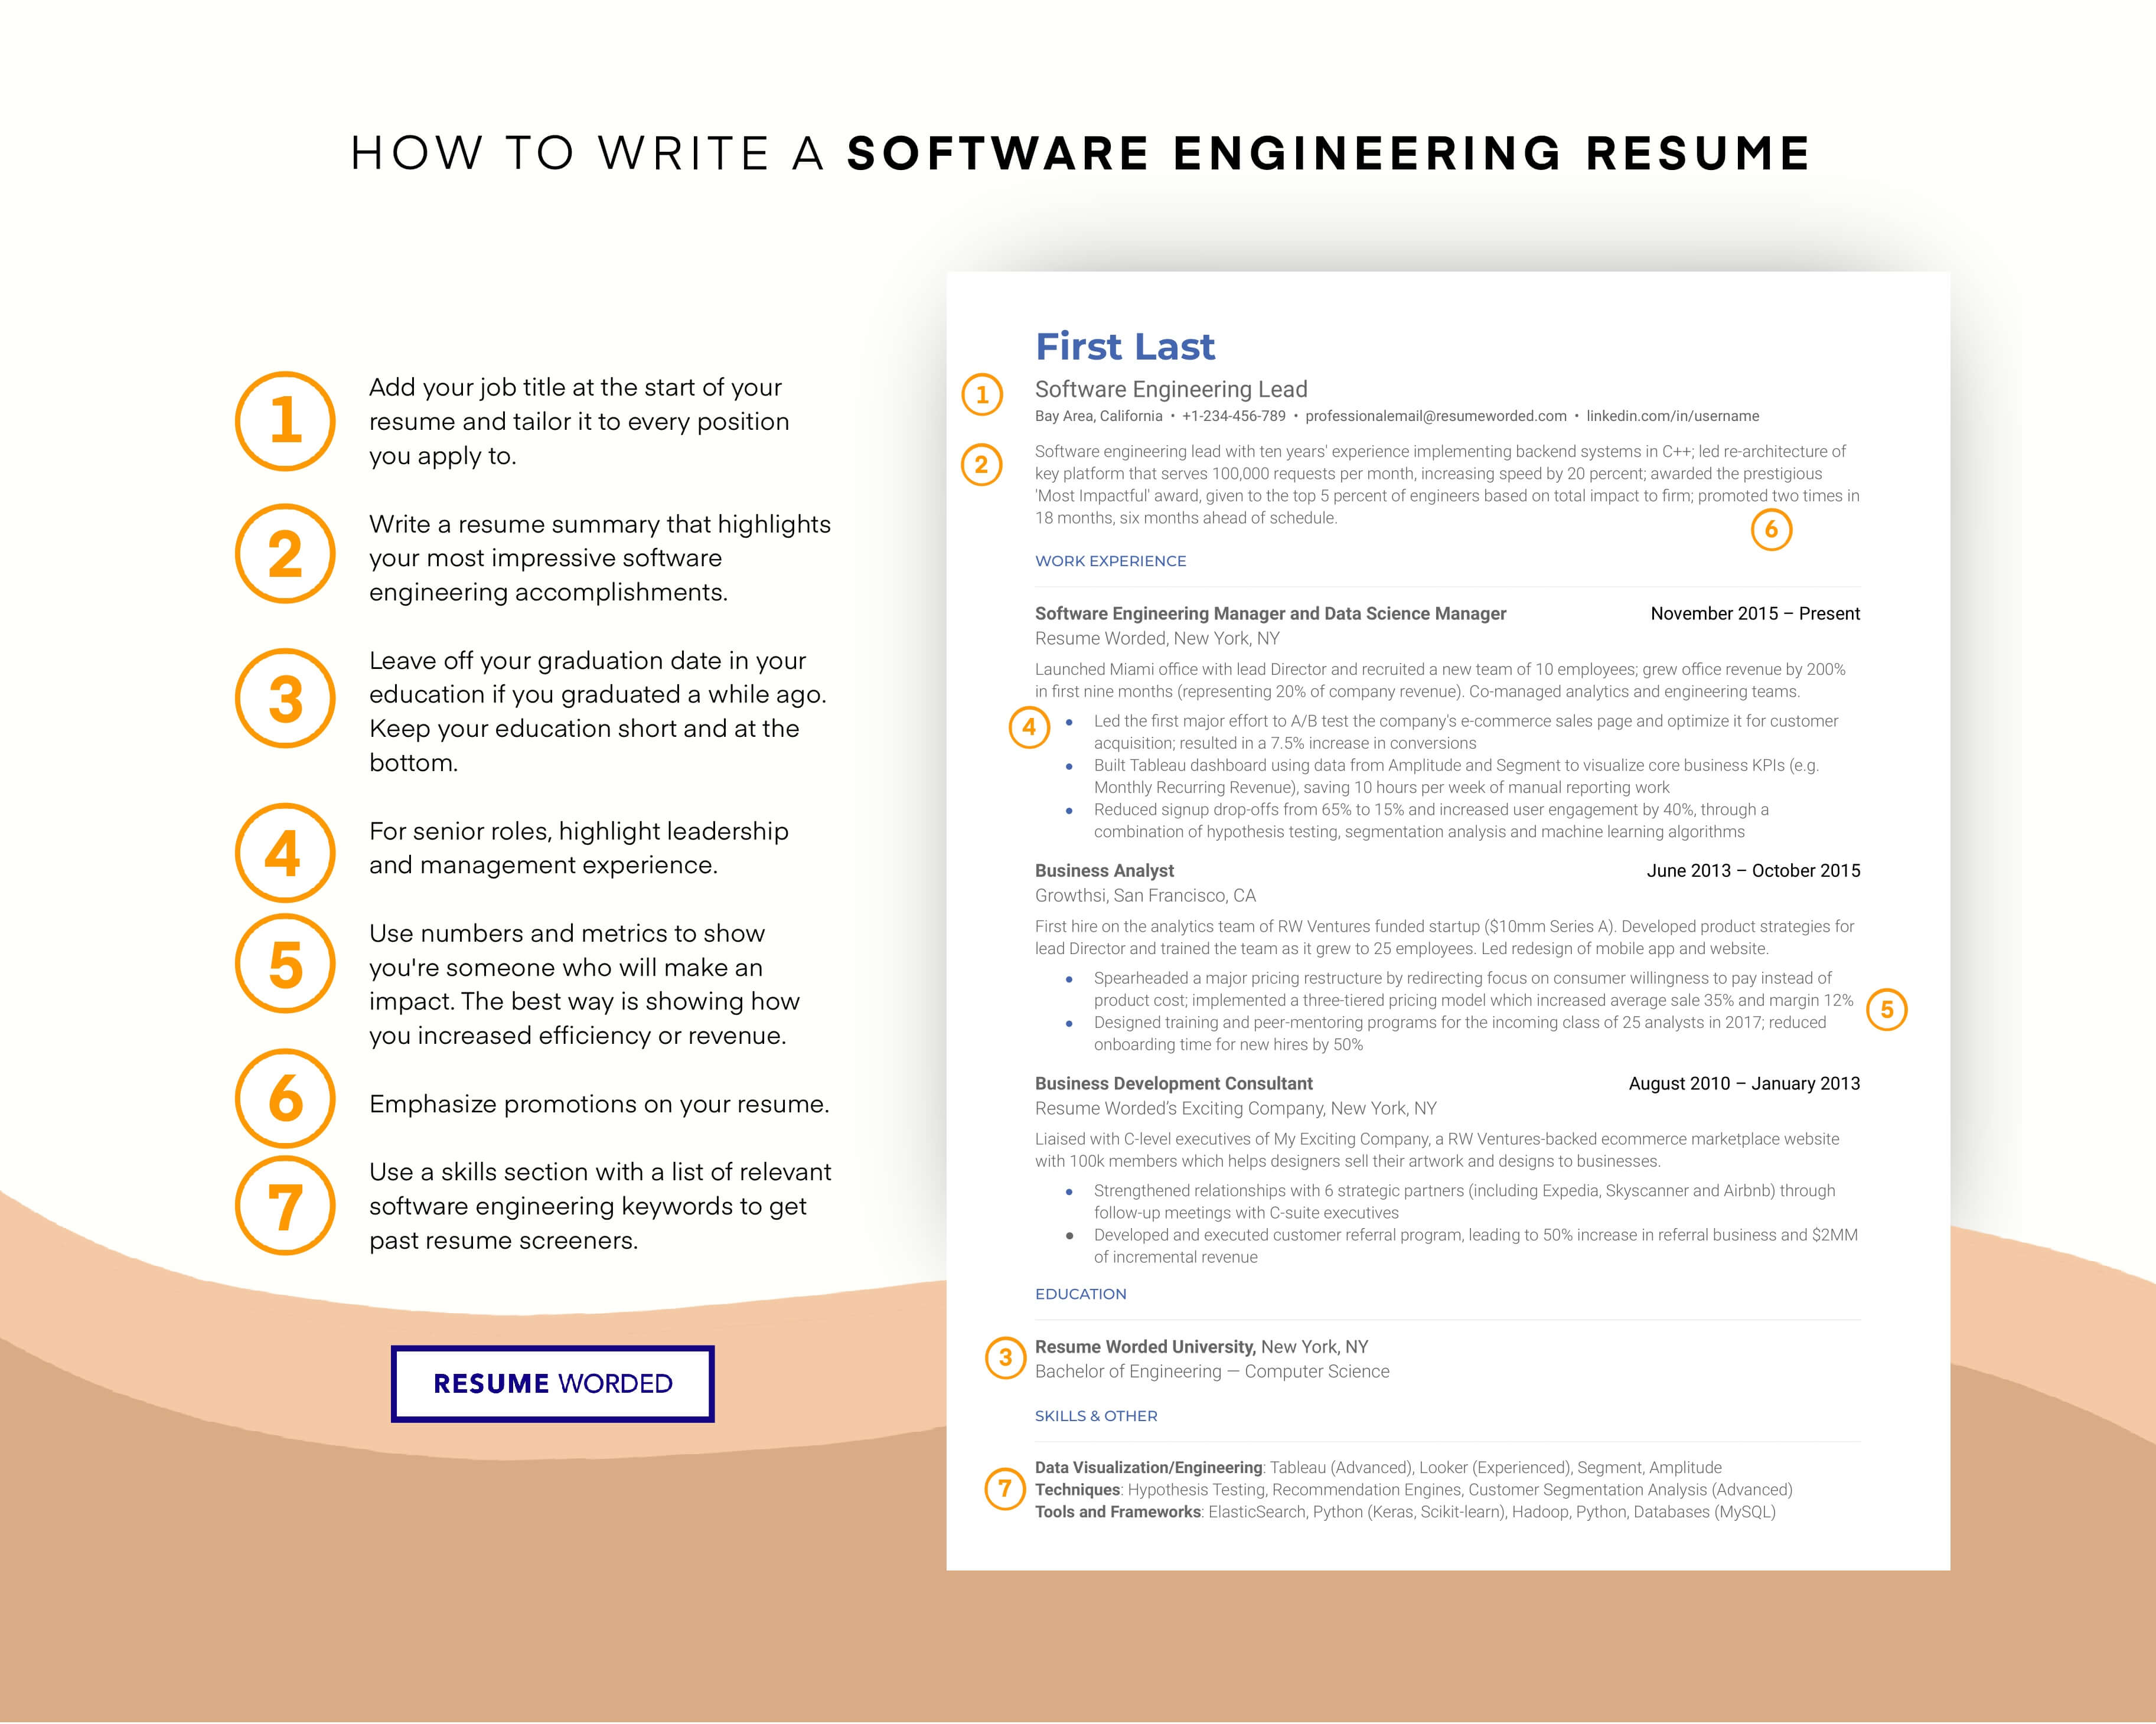 Include software tools you use in your creative process in the skills section. - Creative Director Resume